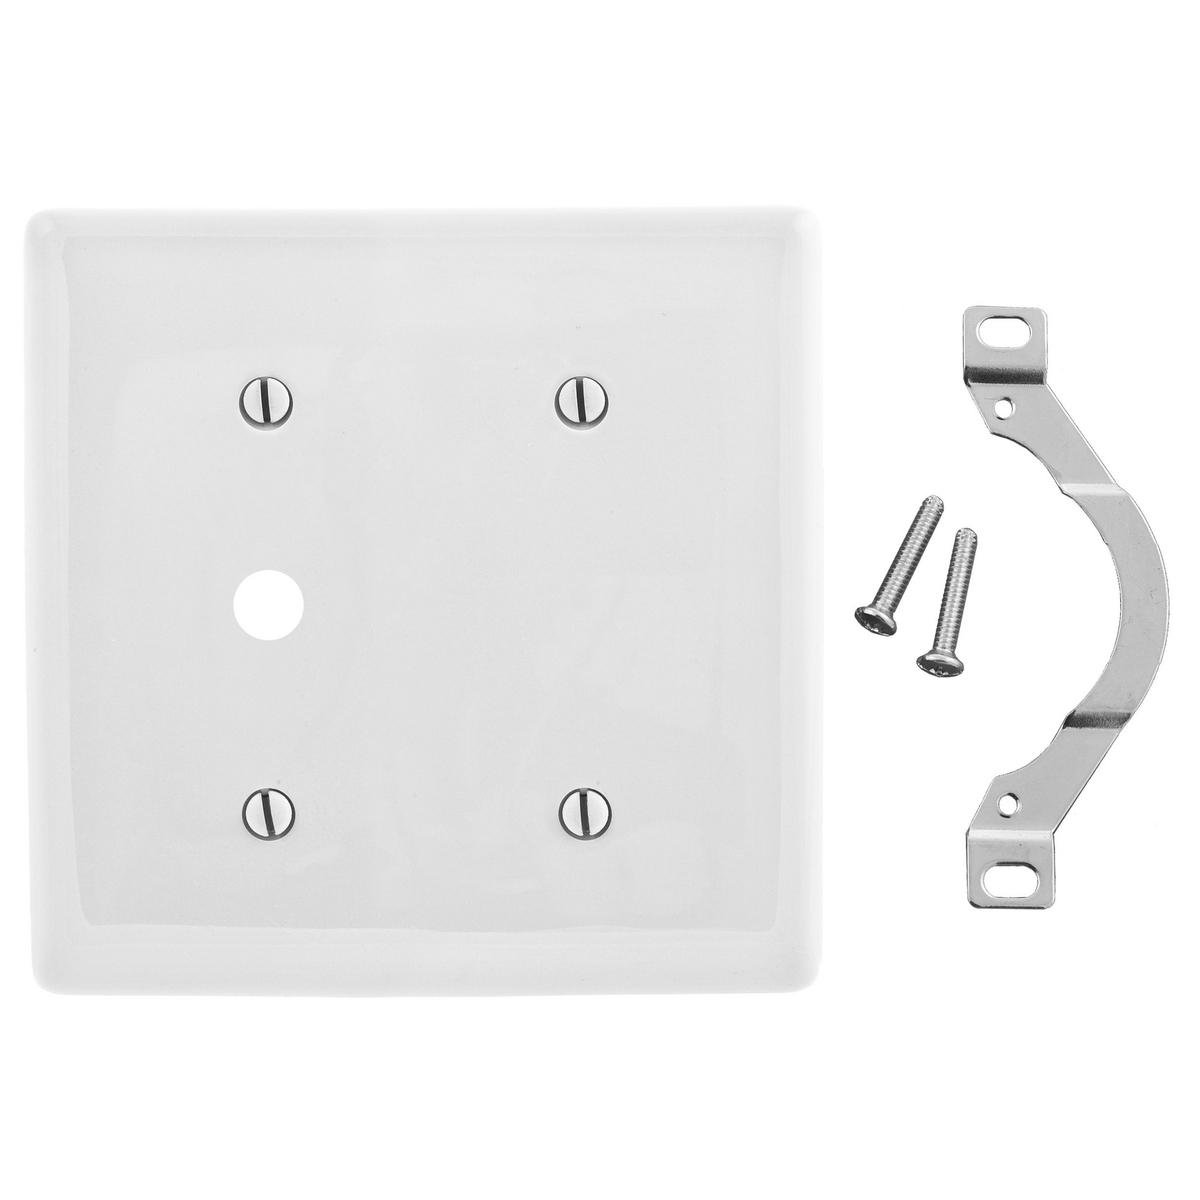 Hubbell NP1214W Wallplates, Nylon, 2-Gang, 1) Blank, 1) .406" Opening, White  ; Reinforcement ribs for extra strength ; High-impact, self-extinguishing nylon material ; Captive screw feature holds mounting screw in place ; Standard Size is 1/8" larger to give you extra c